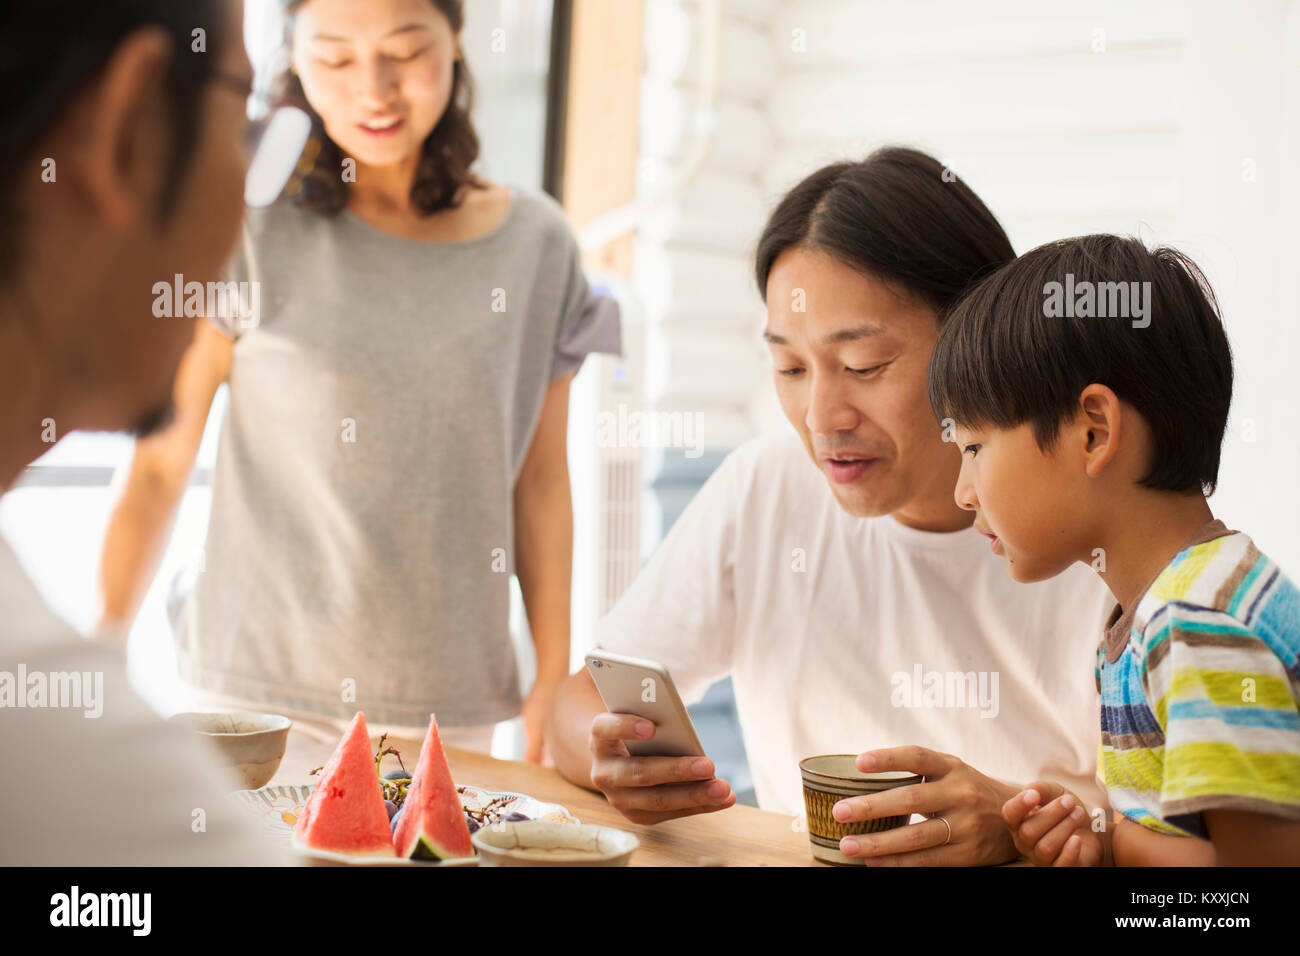 Two men, boy and woman indoors round a table, man and boy looking at mobile phone. Stock Photo